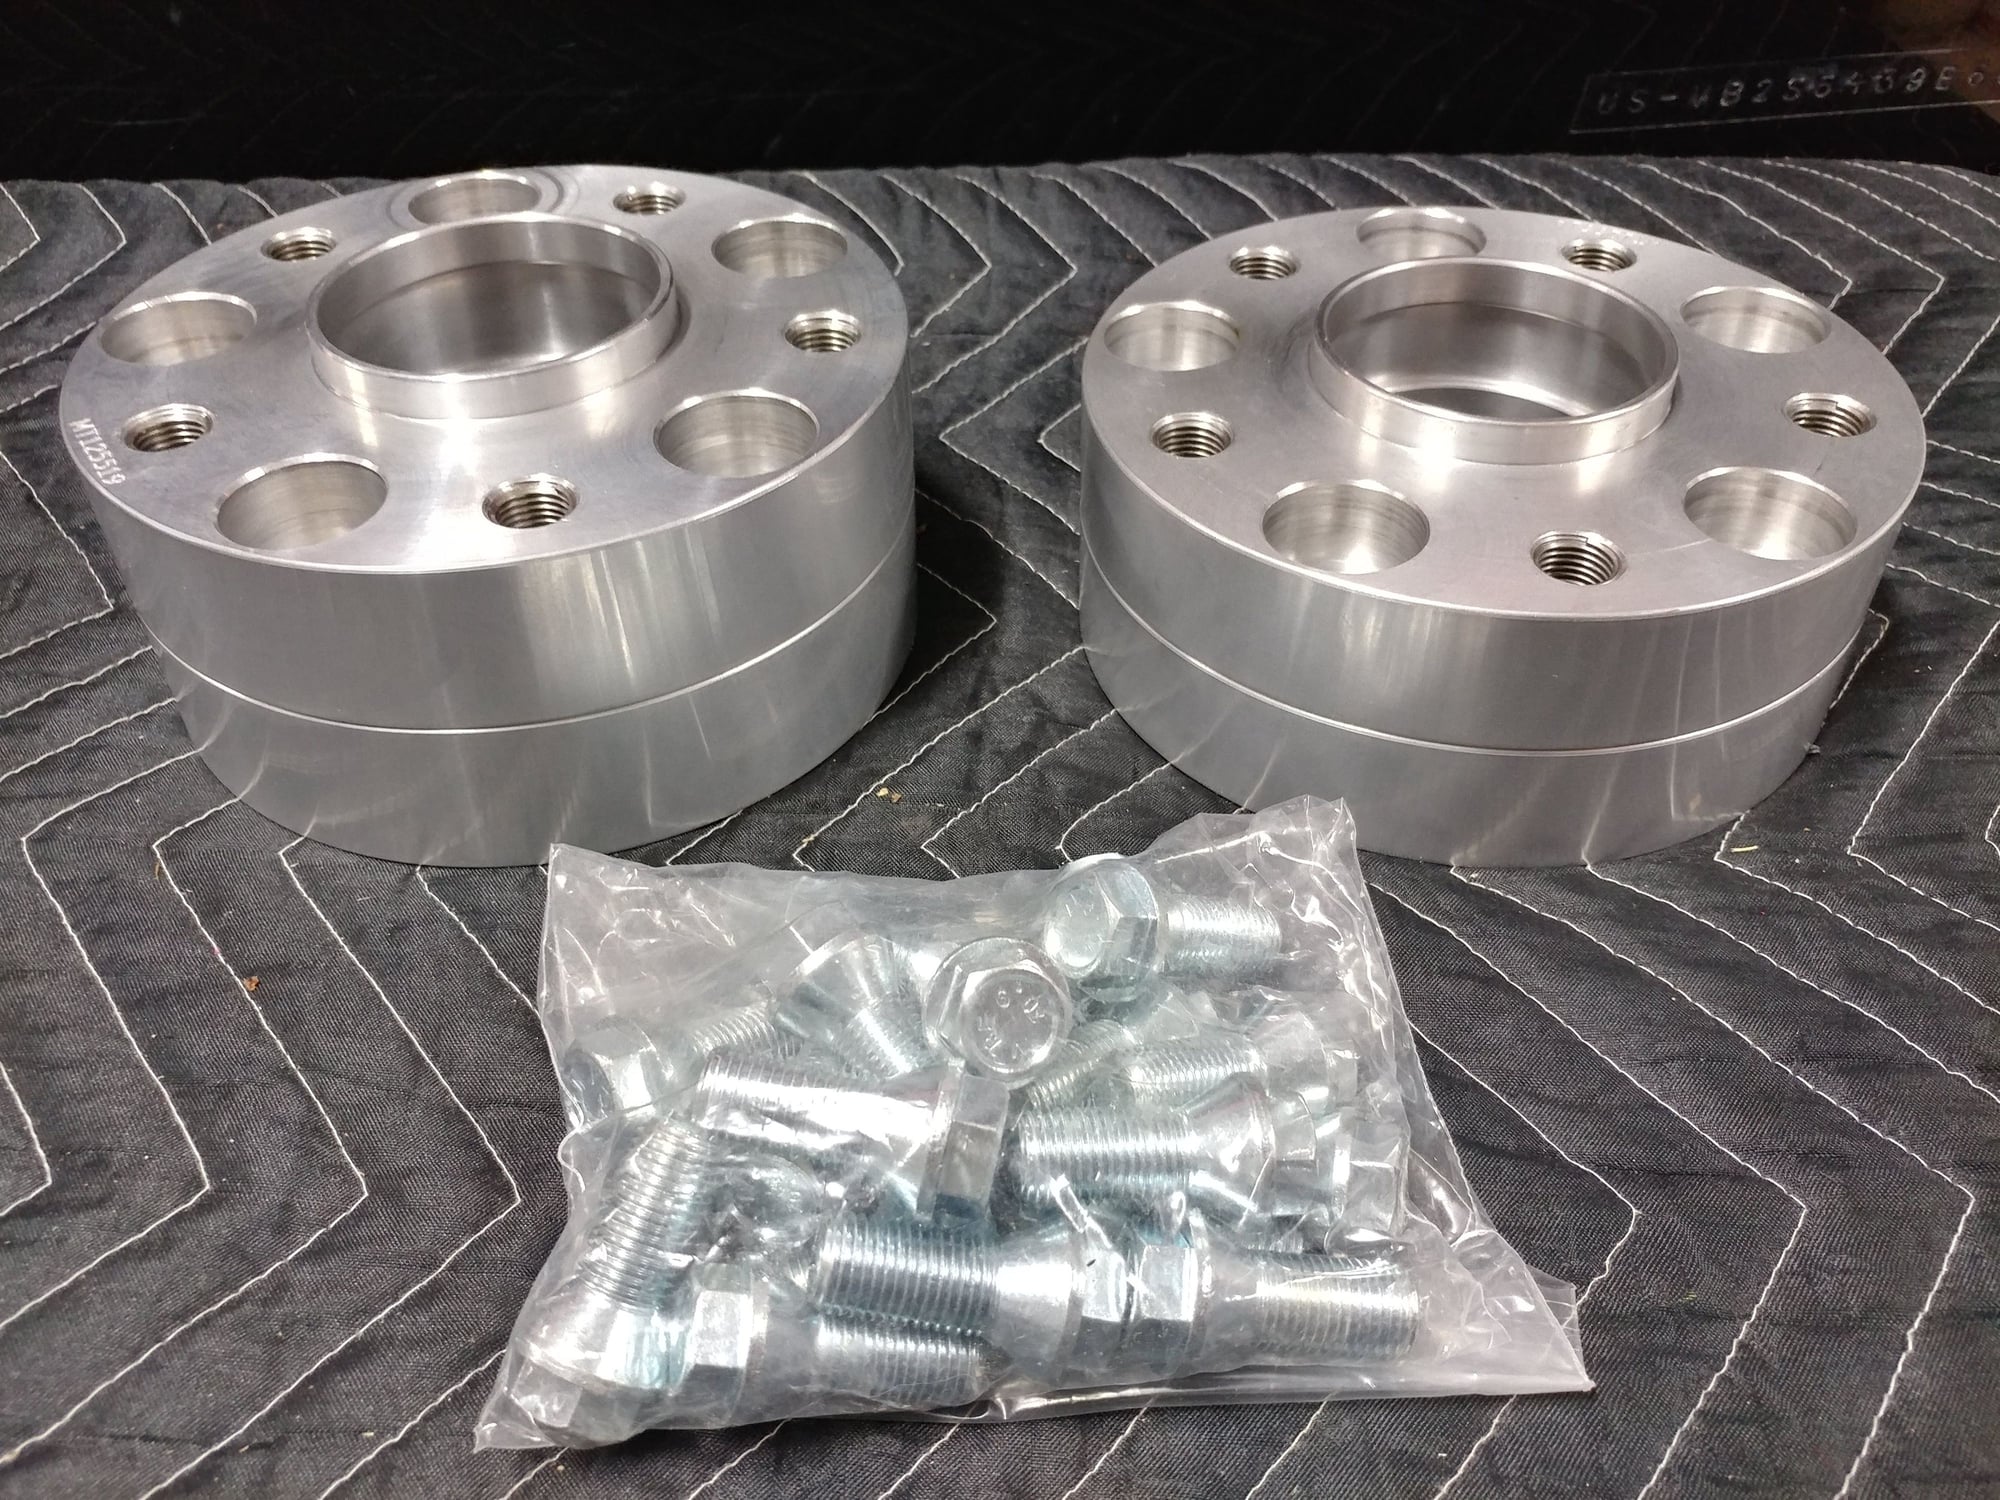 Miscellaneous - BRAND NEW Adaptec Speedware 30mm & 35mm Hub-centric wheel Spacer Pairs for PORSCHE - New - All Years Porsche All Models - Seneca, SC 29672, United States